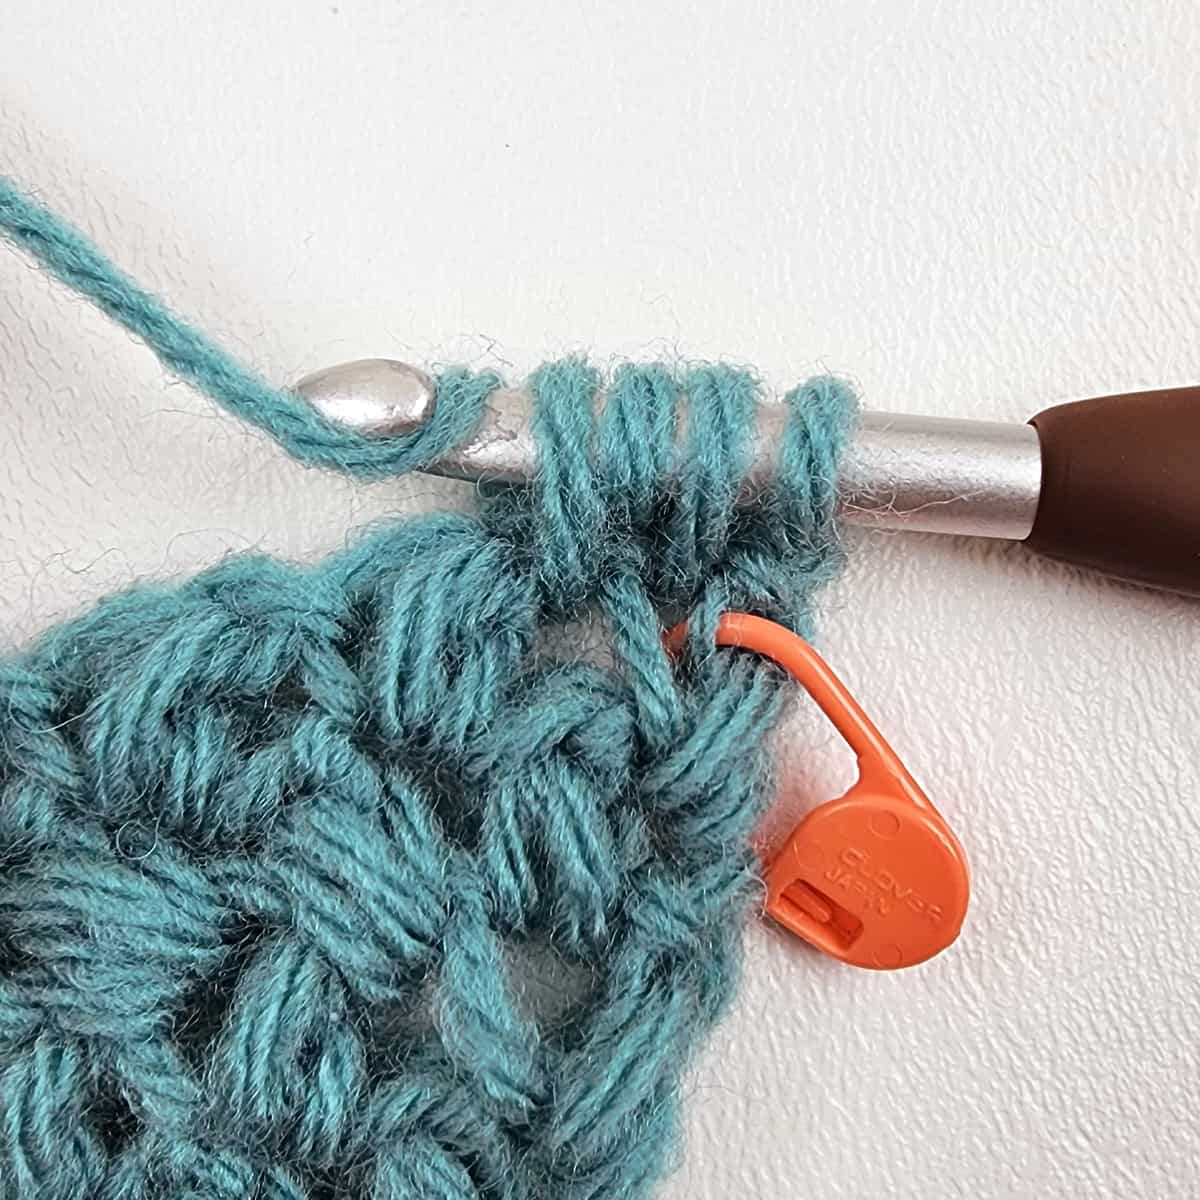 Small crochet swatch showing a mini bean stitch being made.